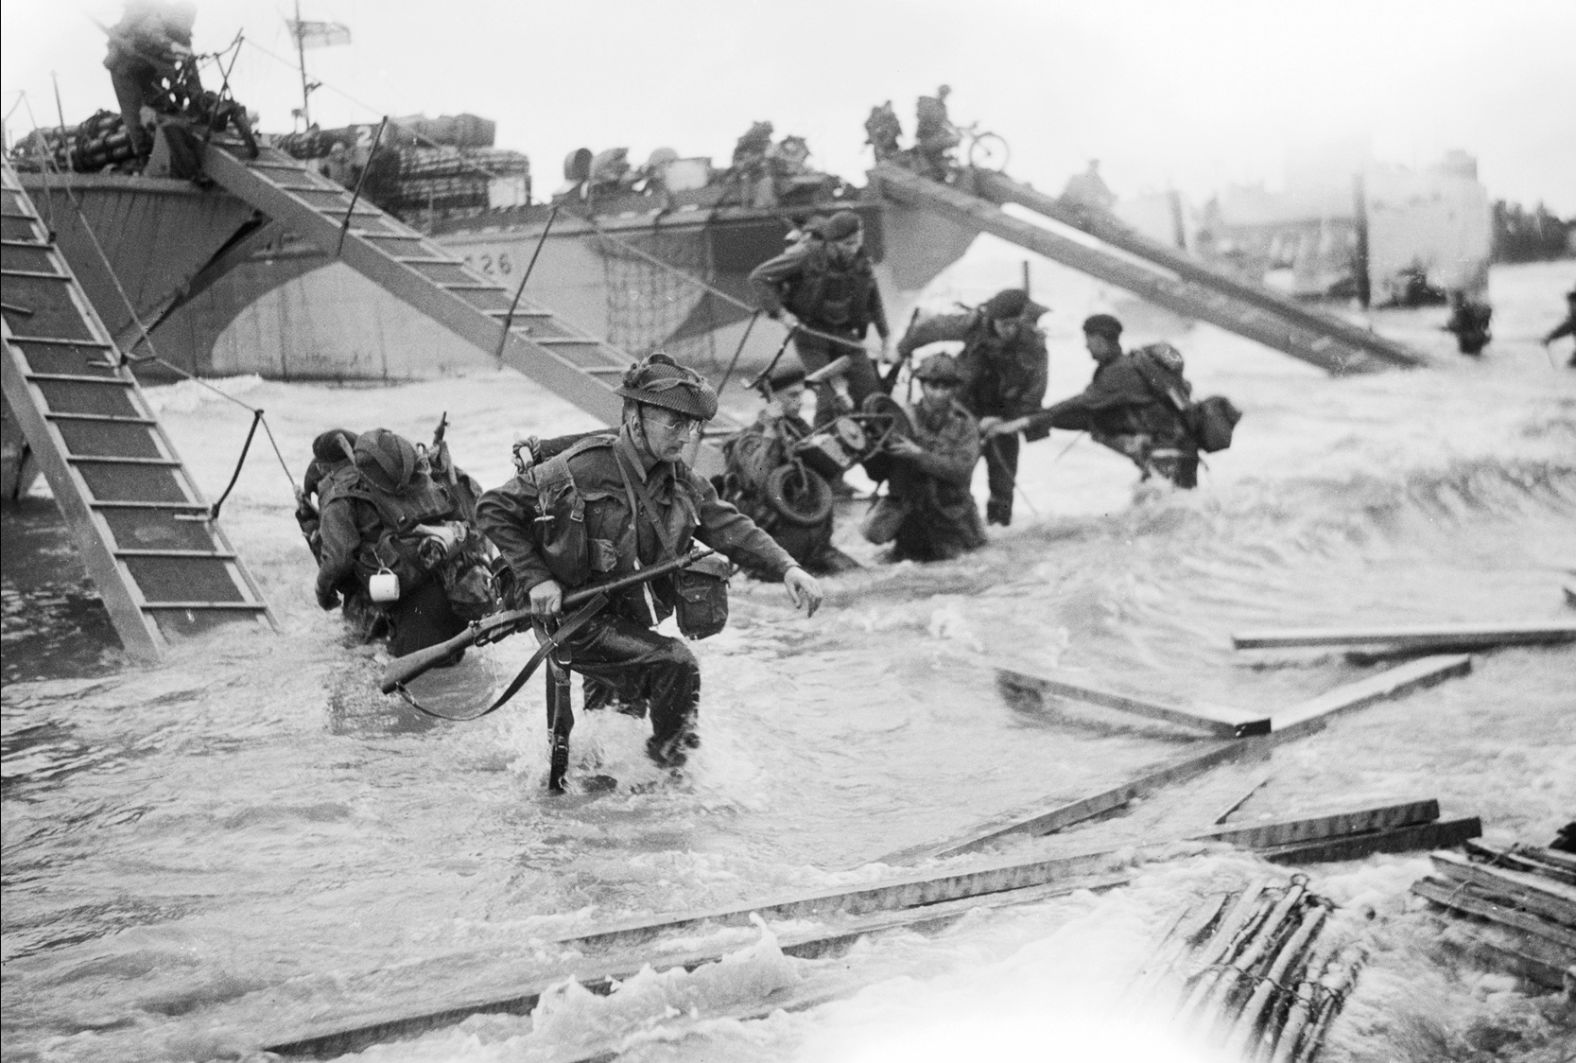 Commandos with the British Royal Navy advance on the beach. Planning for D-Day began more than a year in advance, and the Allies carried out substantial military deception to confuse the Germans as to when and where the invasion would take place.